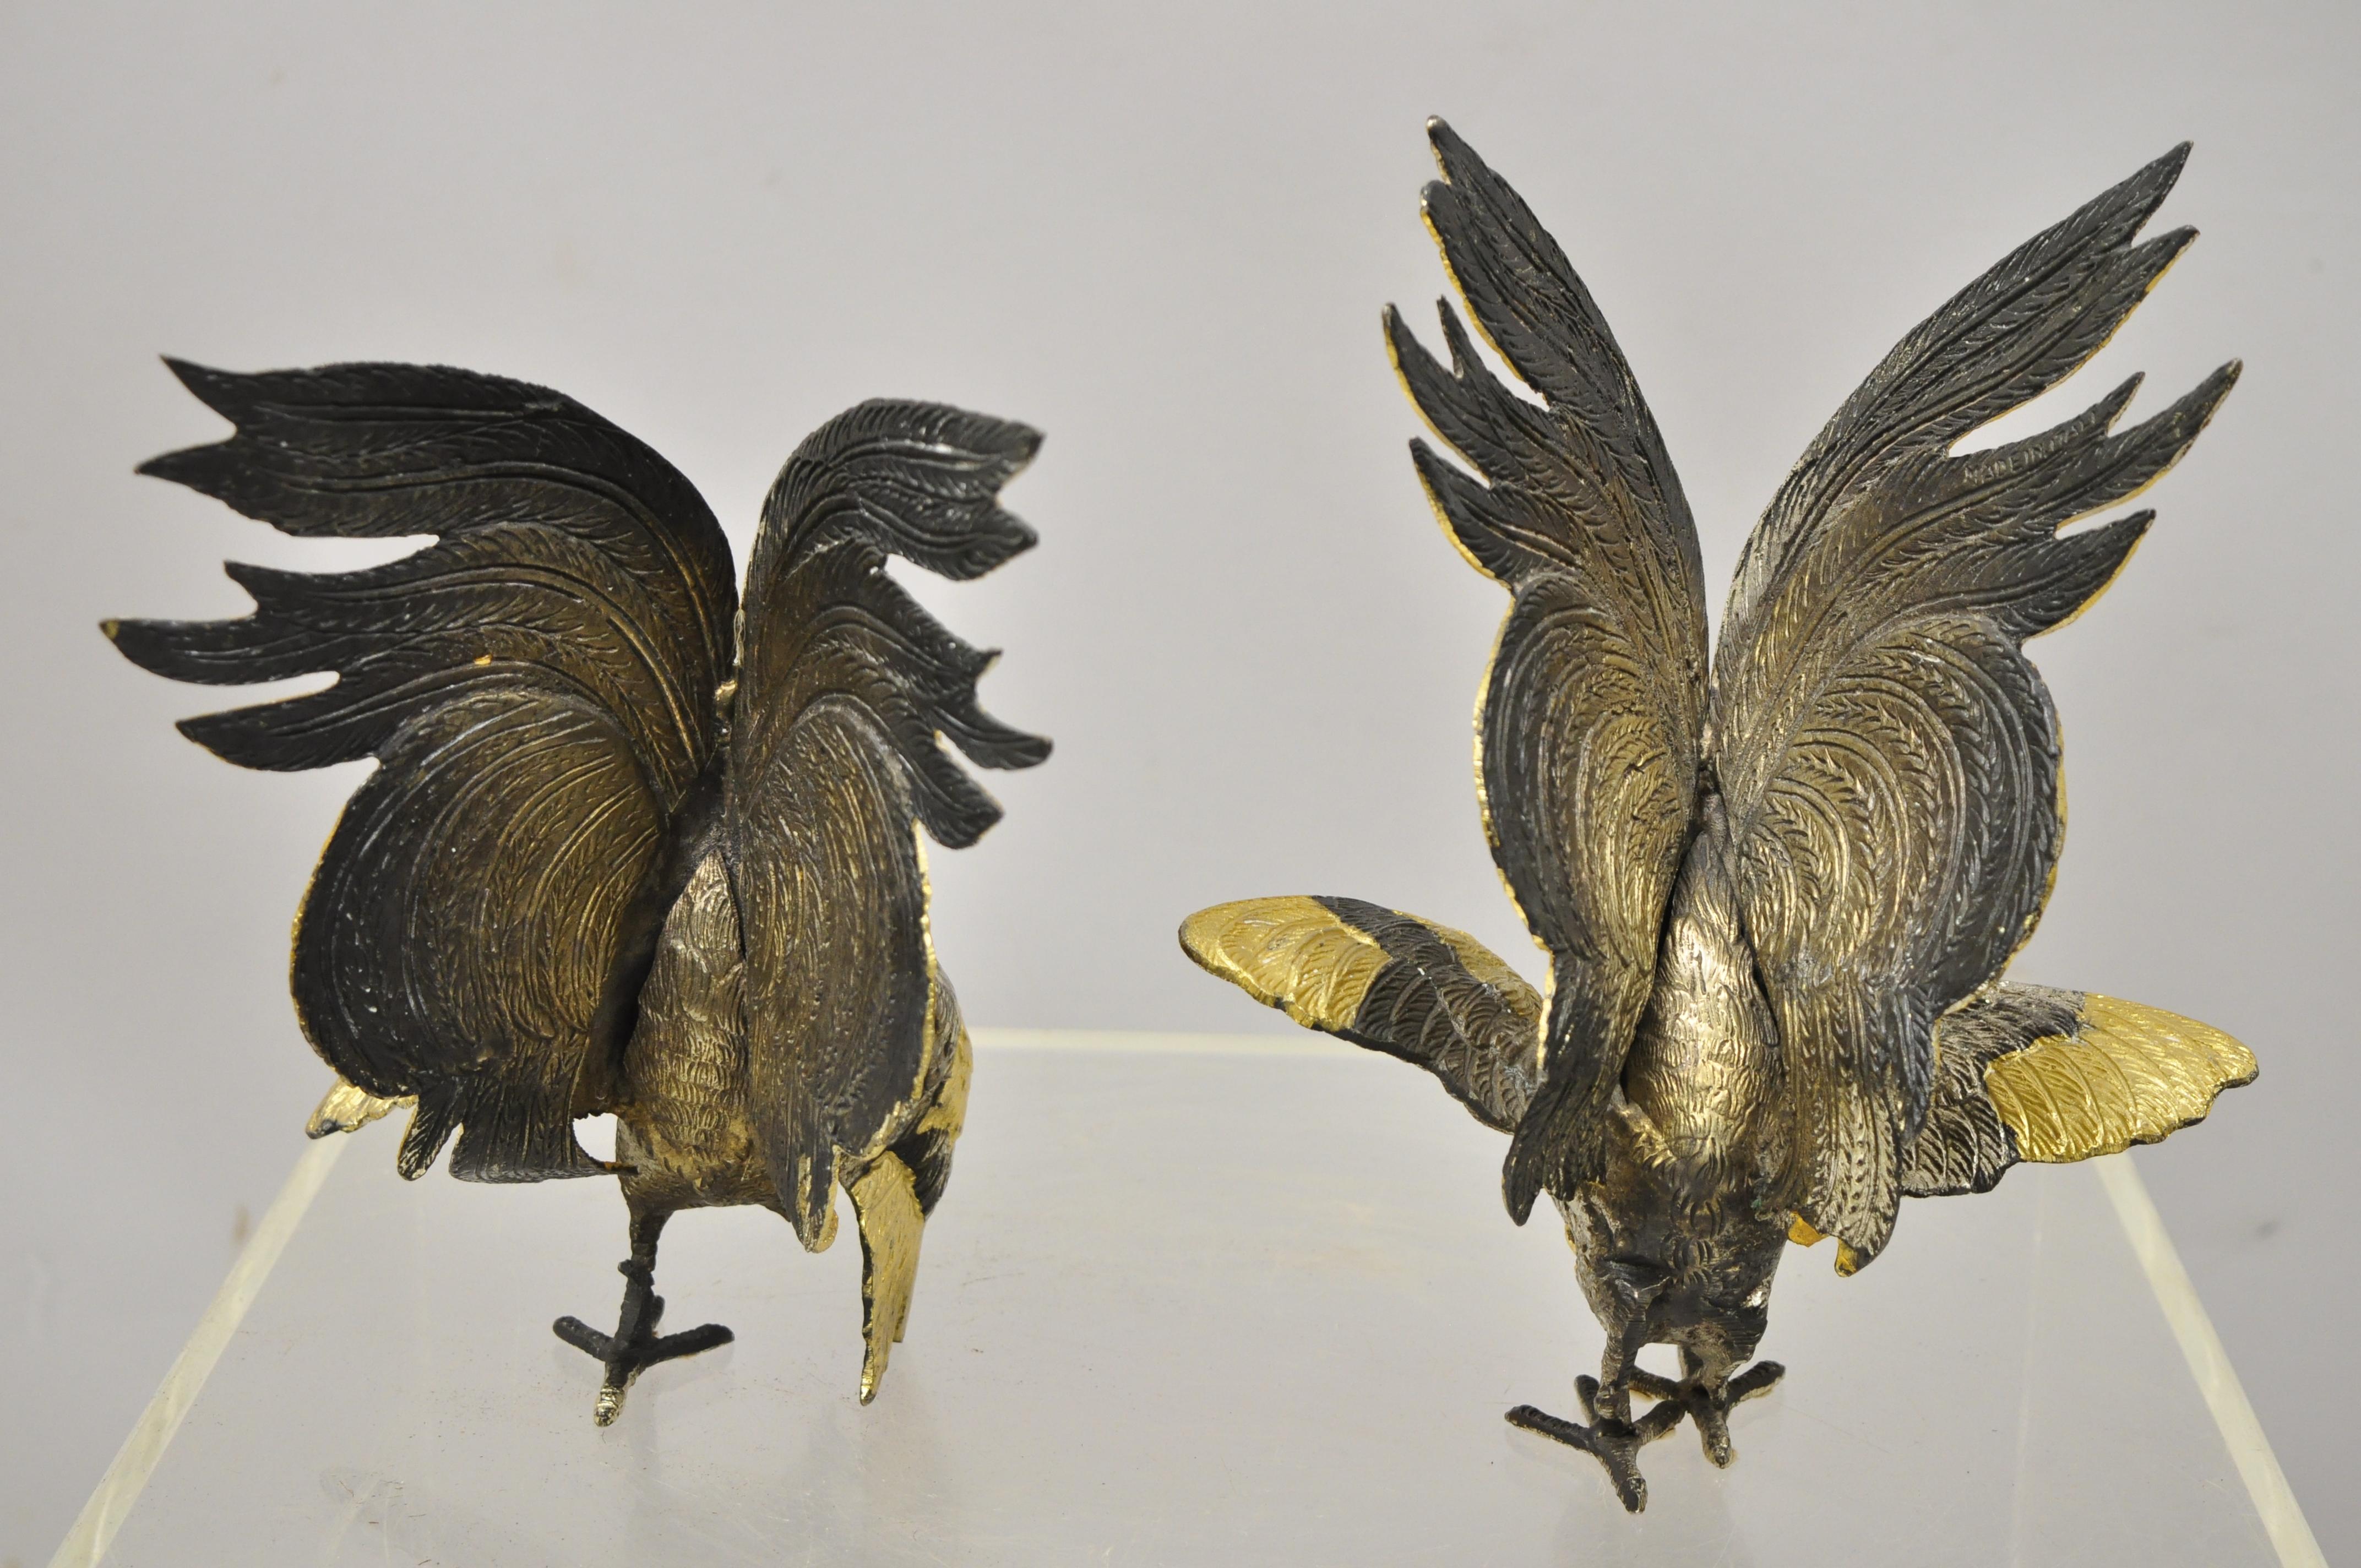 20th Century Italian Gold Silver Gilt Metal Cock Fight Fighting Rooster Figurines, Pair